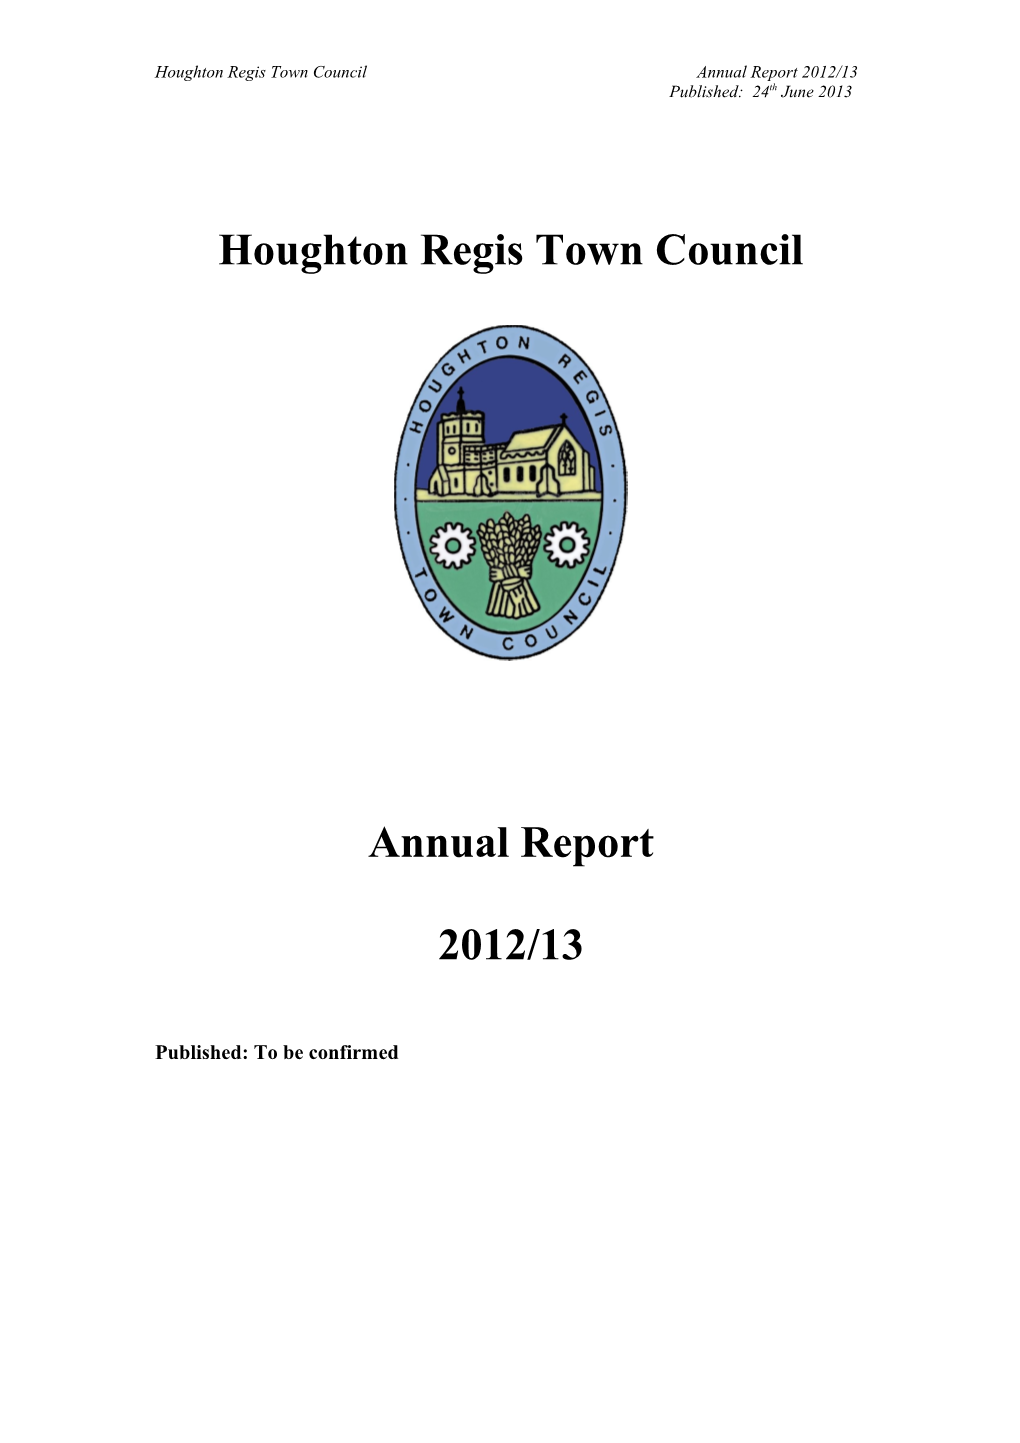 Houghton Regis Town Council Annual Report 2012 / 13